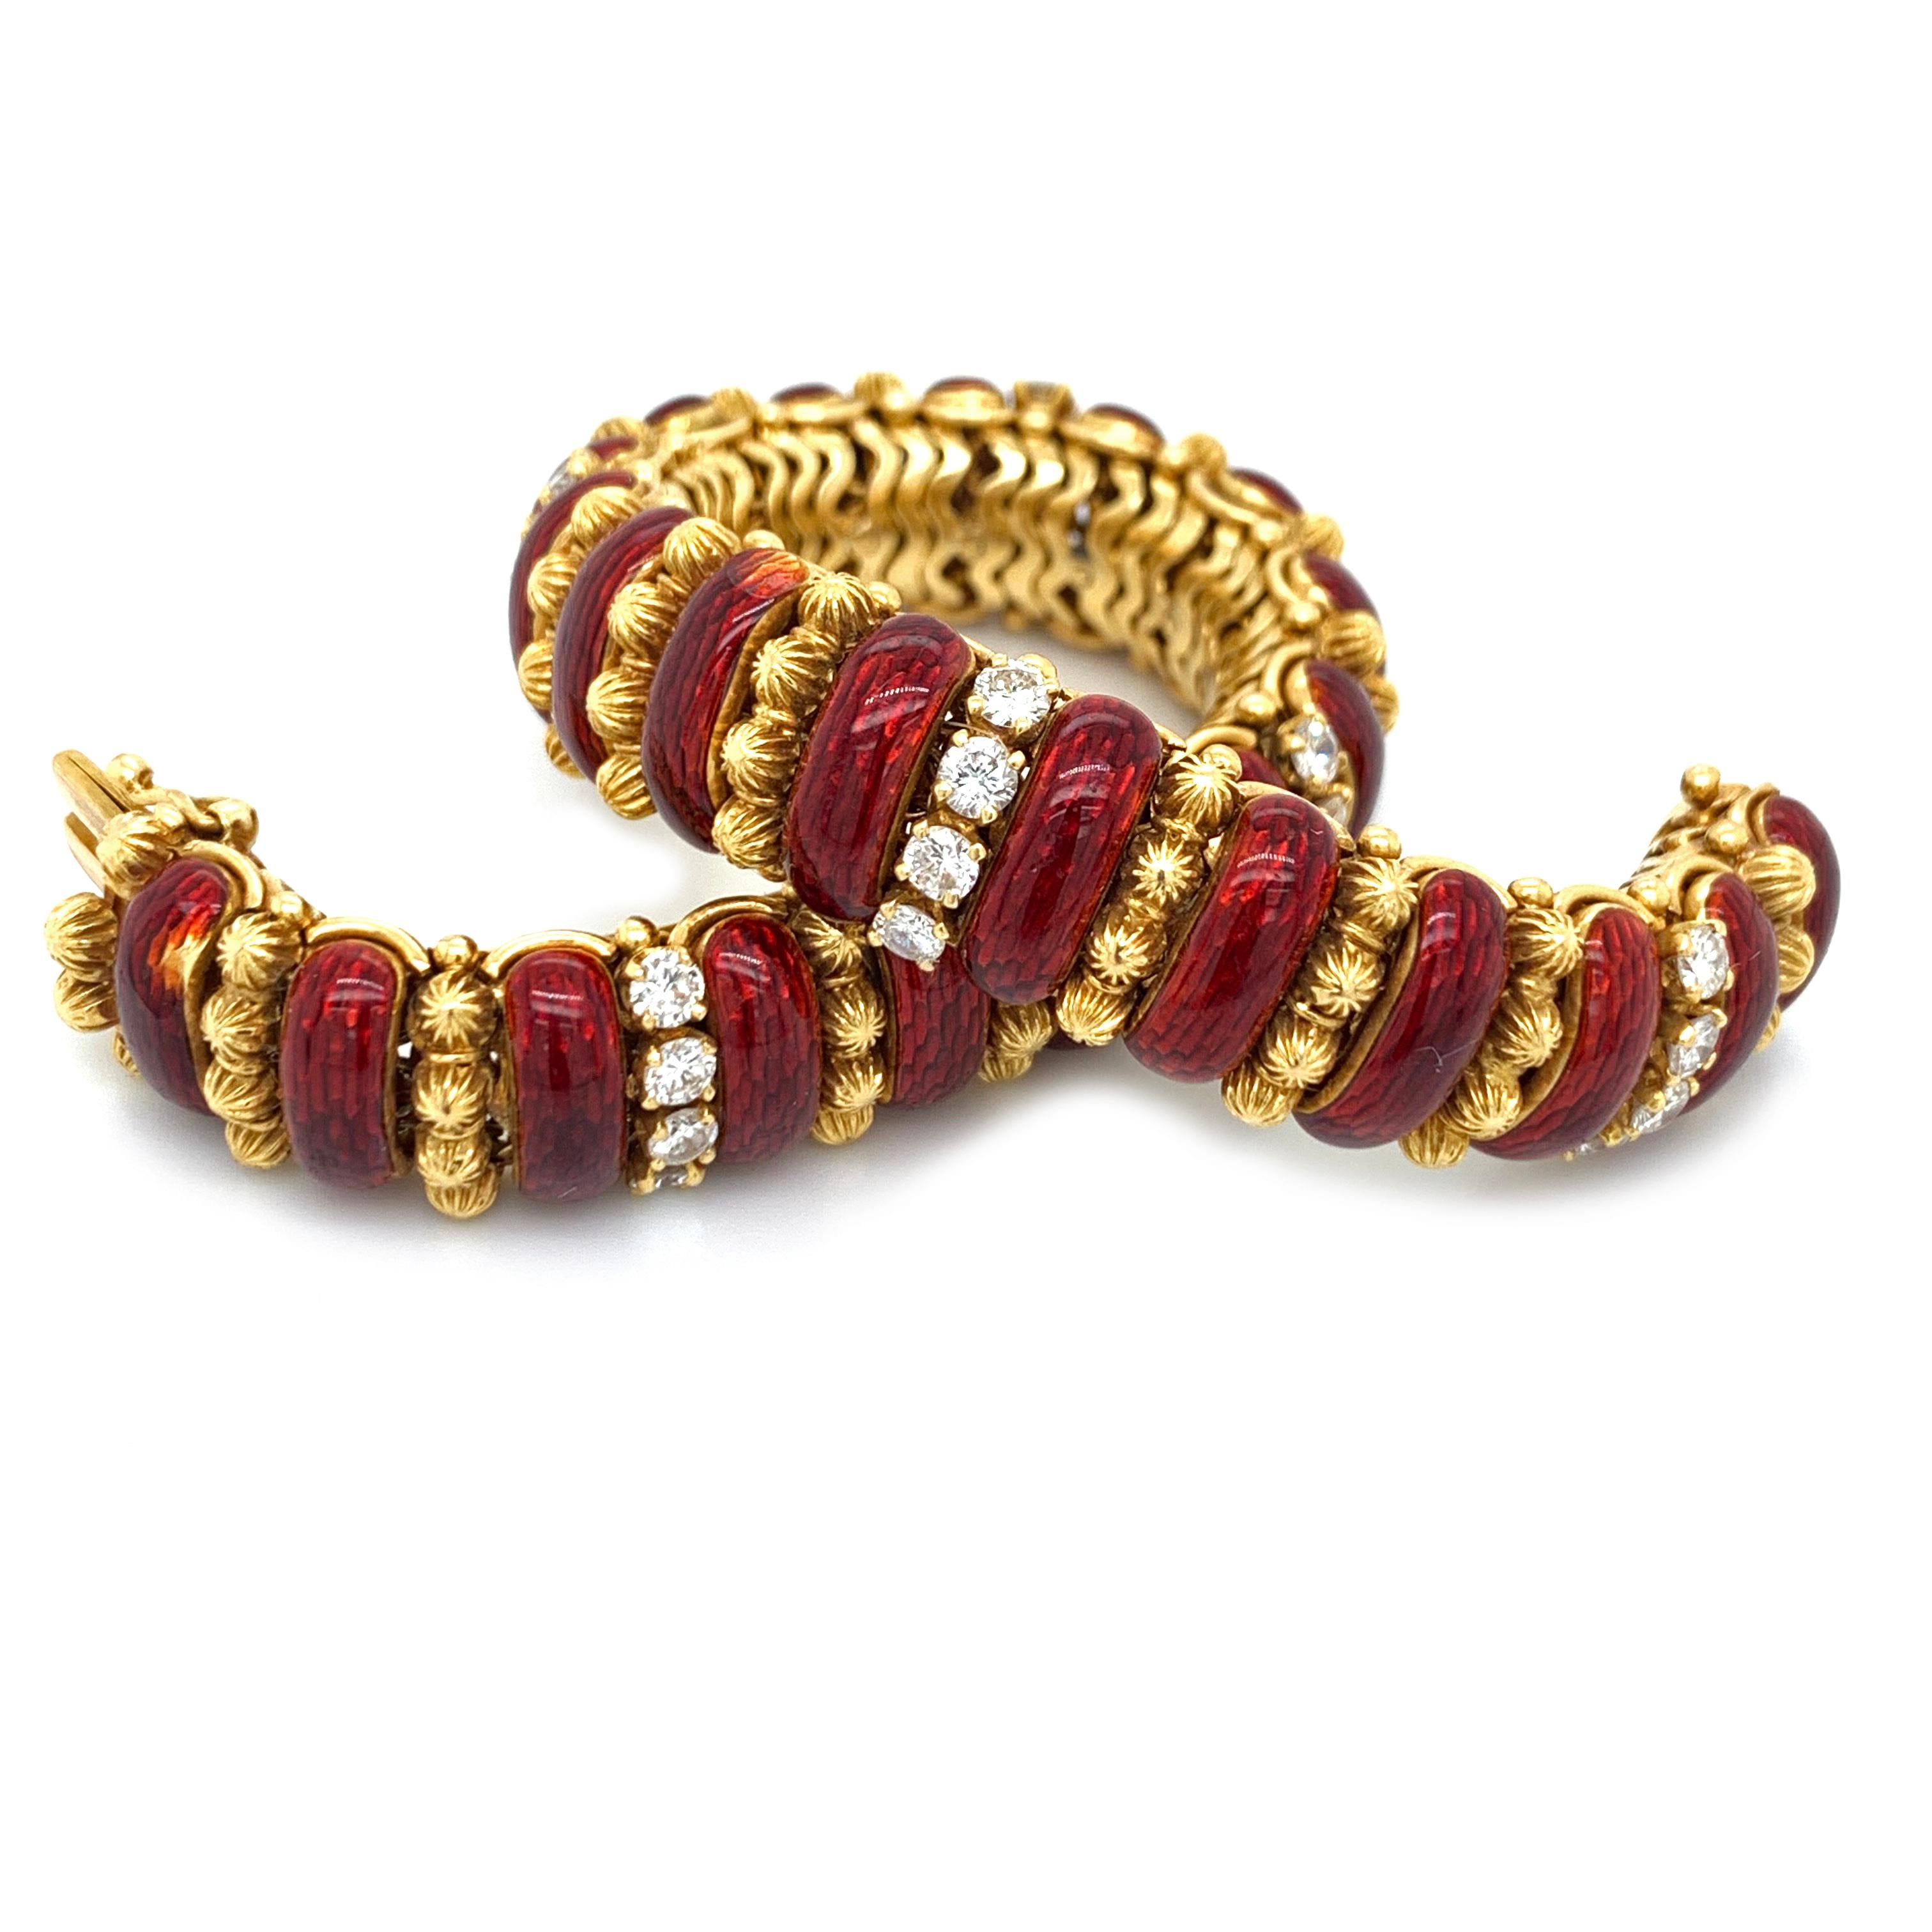 A, beautiul and timeless Van Cleef & Arpels bracelet. From, the 1970's we have a beautiful 7.2